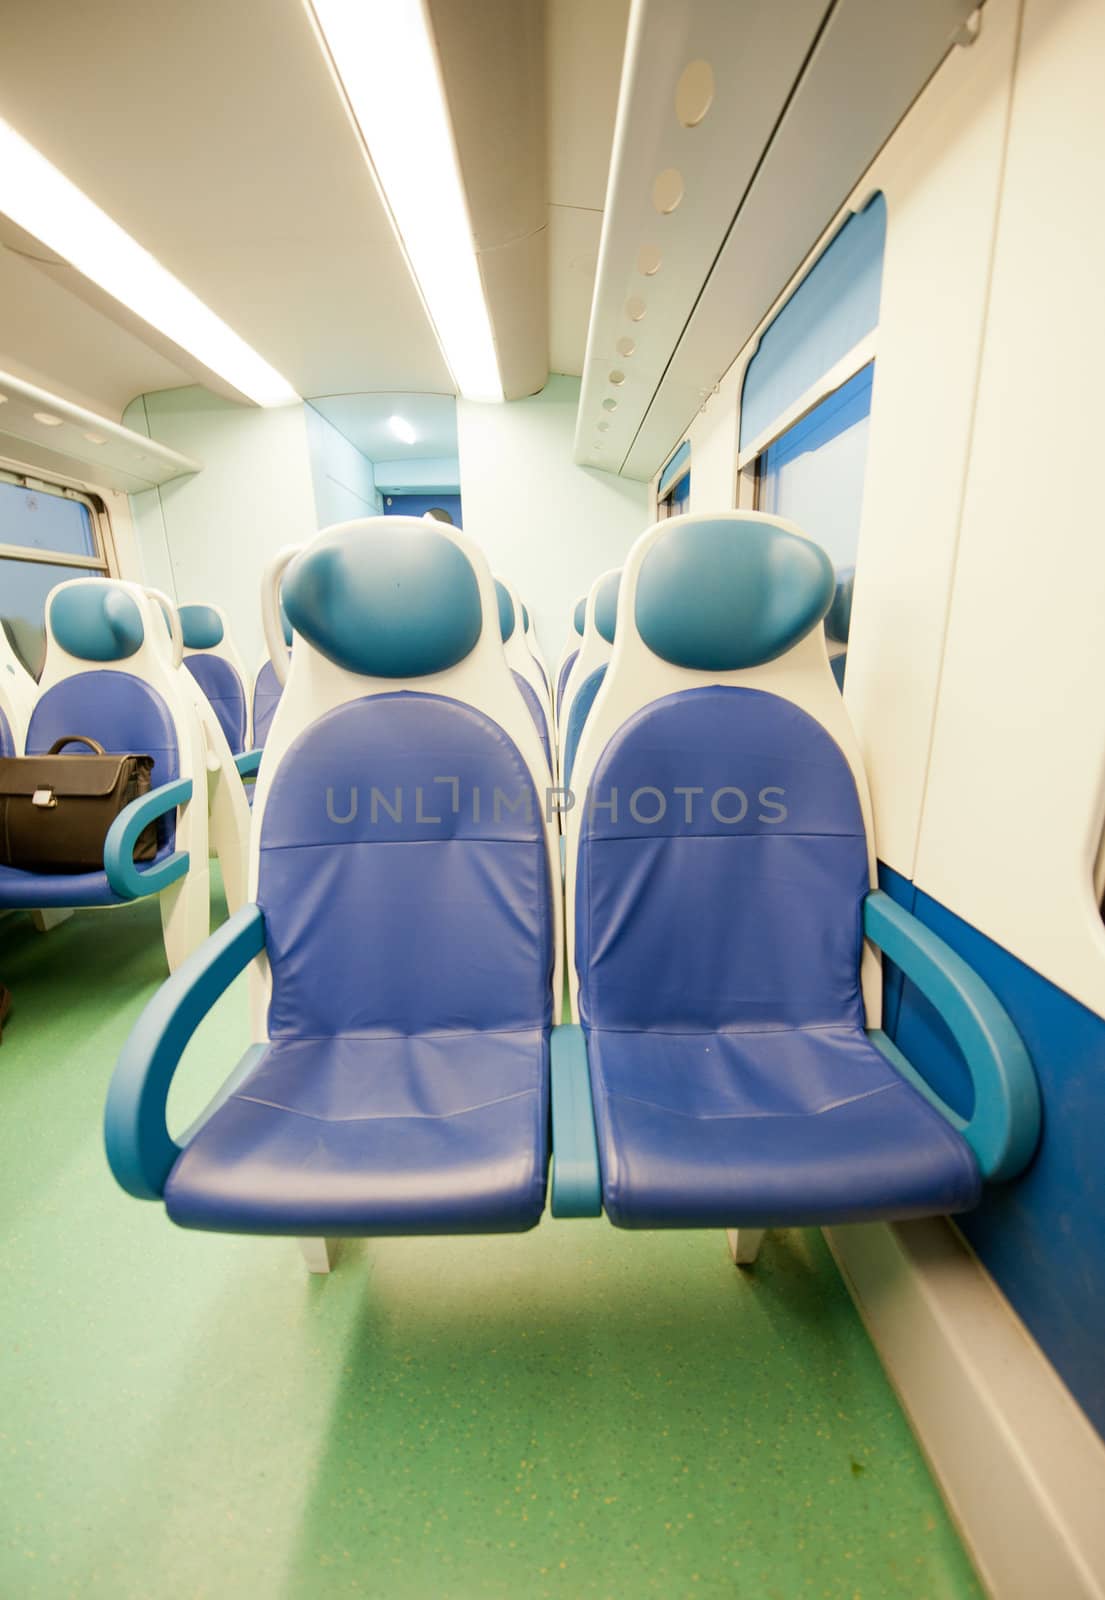 Inside a train without persons